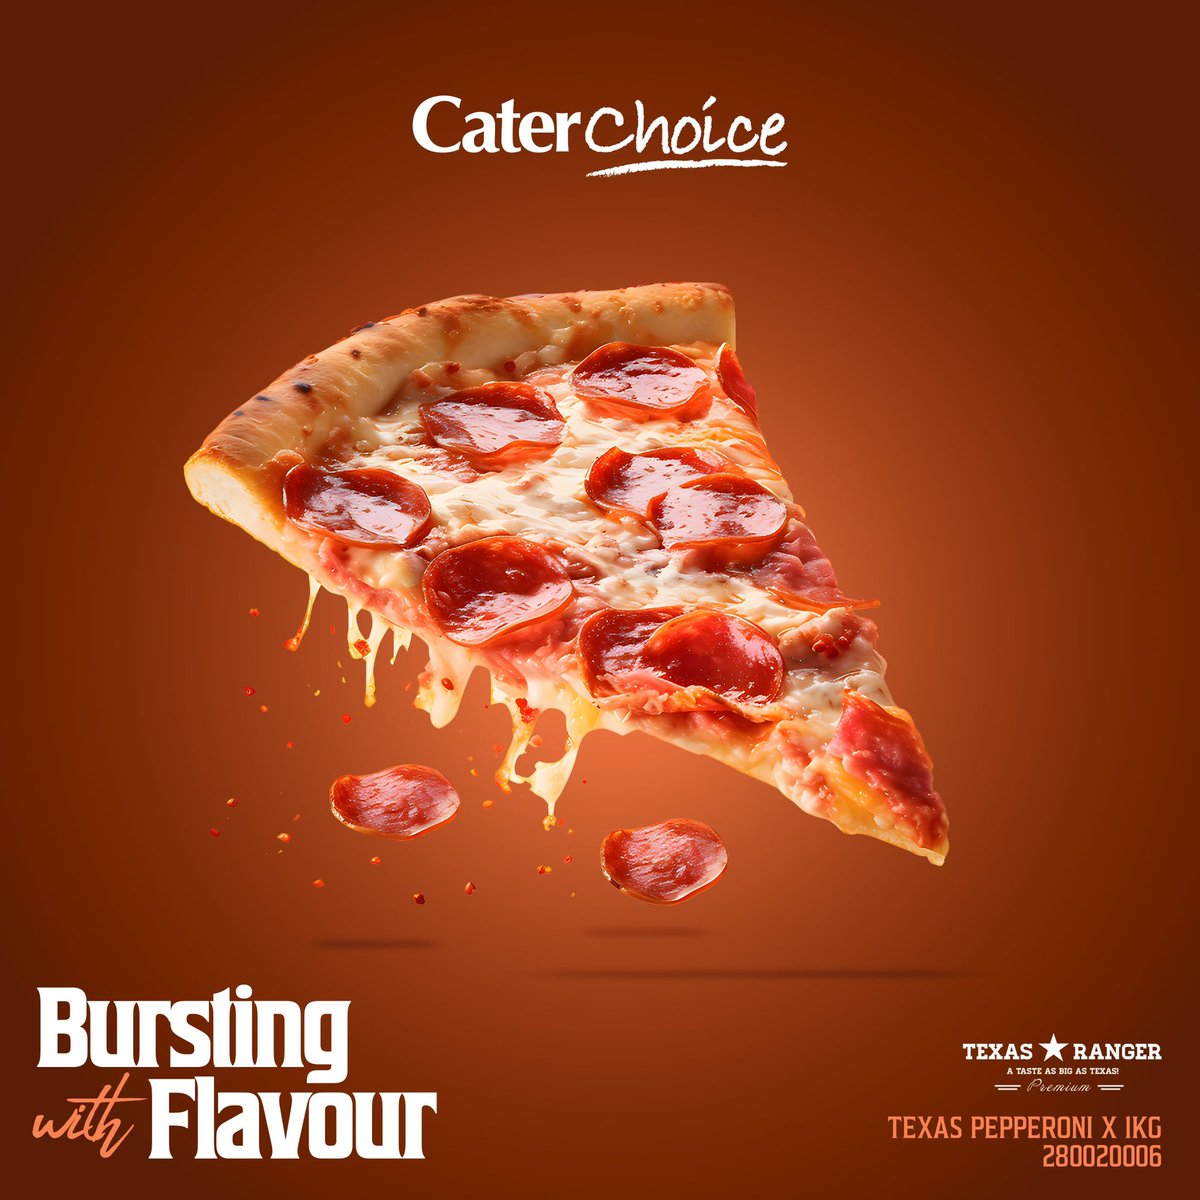 Indulge in the timeless favourite for pizza enthusiasts everywhere. 🍕

#pizzatopping #pepperonipizza #pepperonilovers
#pepperoniplease #pizzatopper #BurstingwithFlavour
#FoodieUK #CateringIngredients #Qualityfood
#Restaurantsuk #caterchoice #Foodservice
#CashandCarry #Wholesale